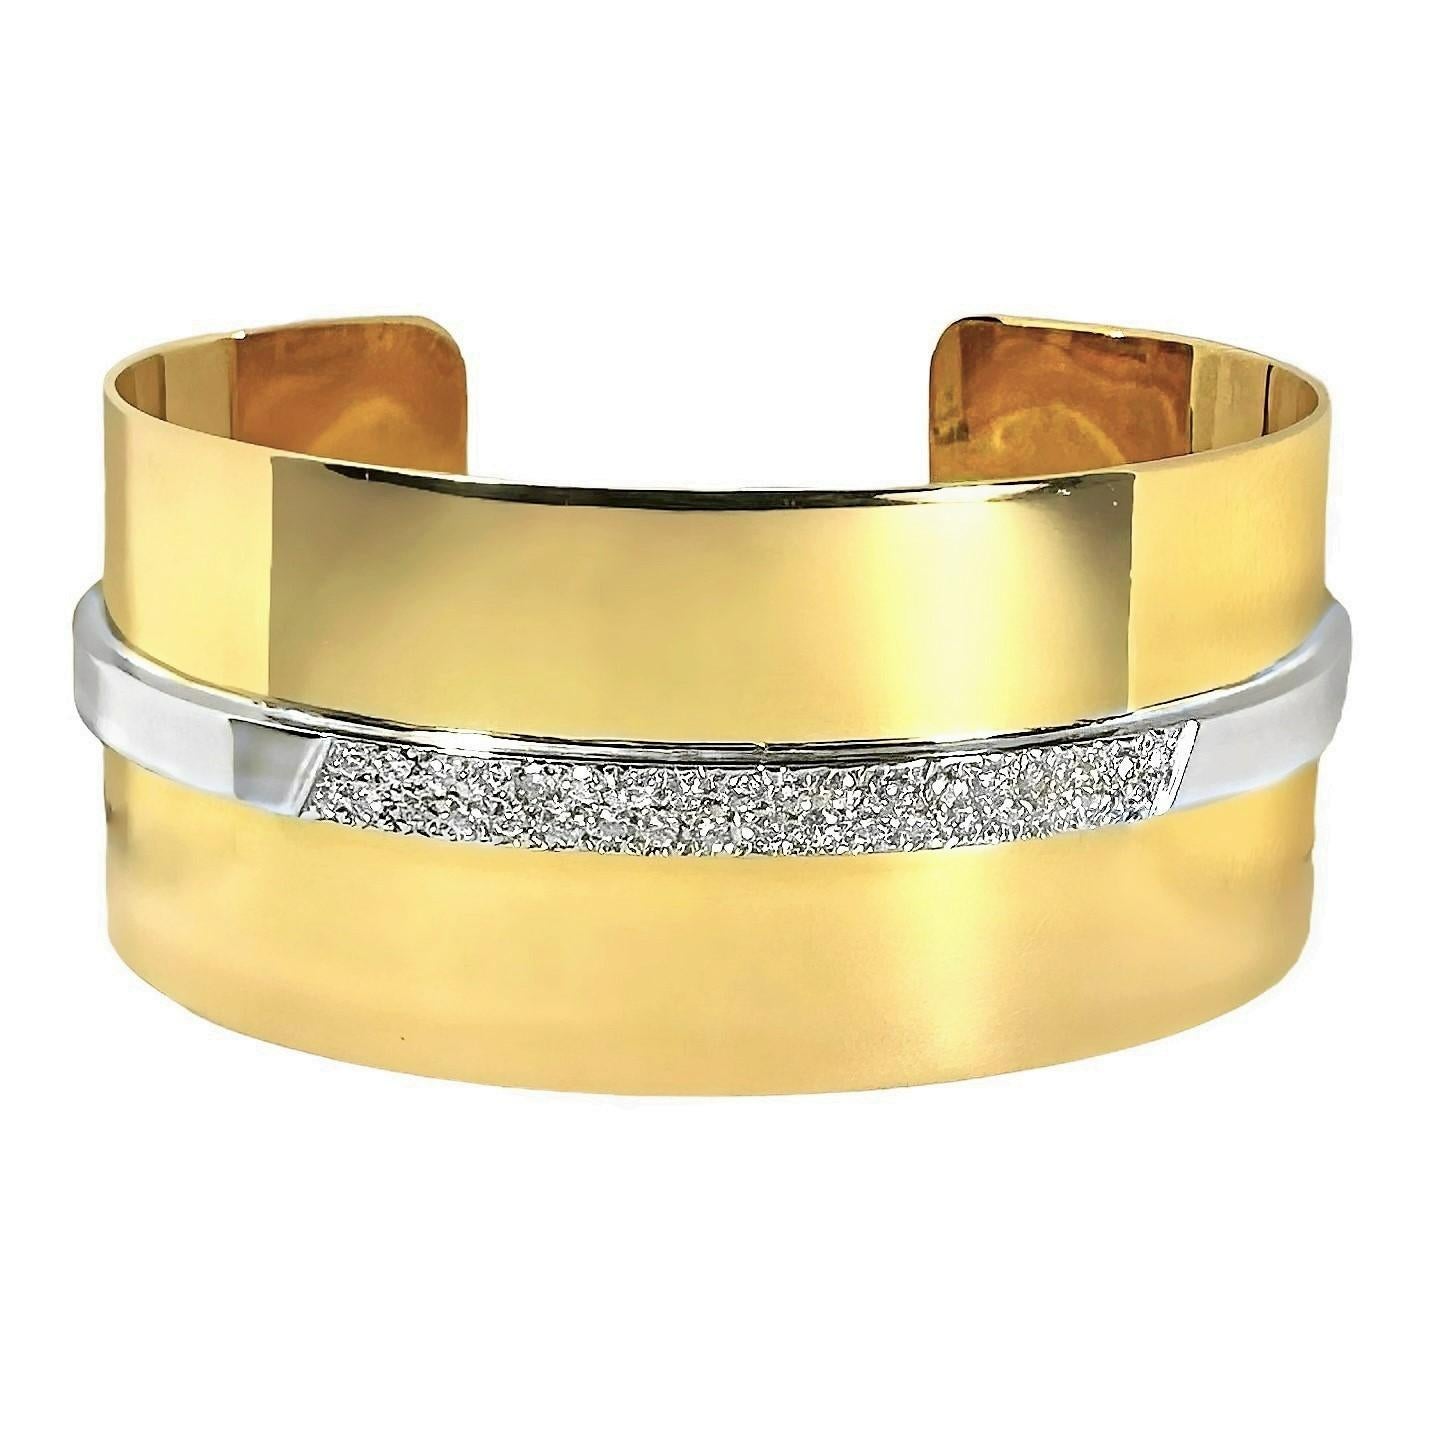 This sophisticated 18K yellow and white gold Modernist cuff bracelet is just as 